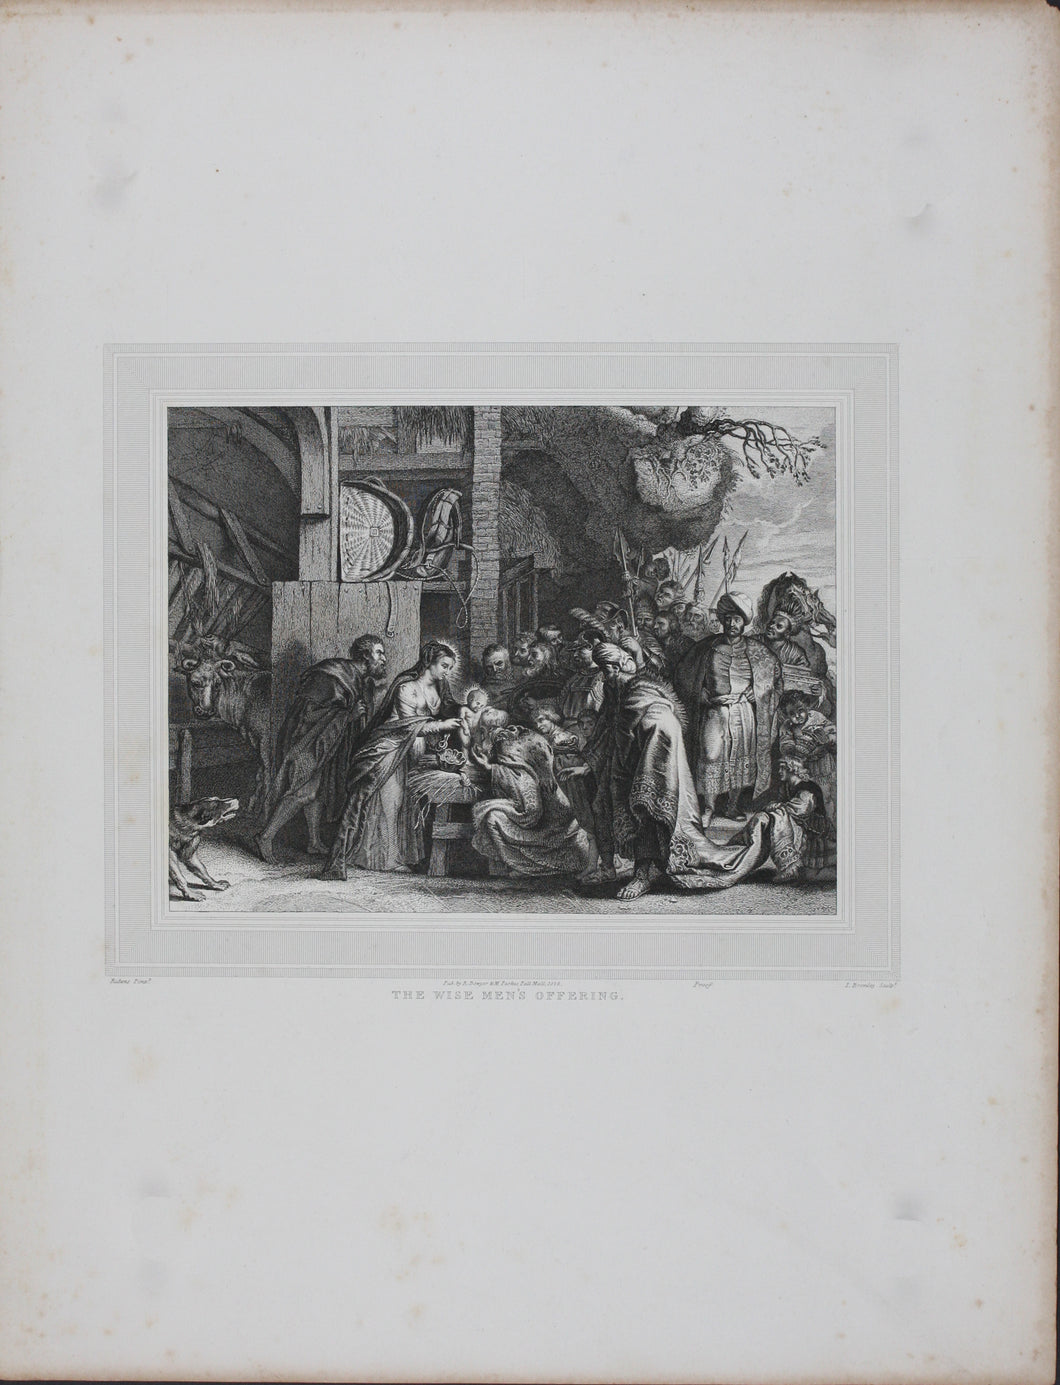 Peter Paul Rubens, after. Lucas Vorsterman the Elder, after. Adoration of the Magi. Engraving by John Charles Bromley. 1826.